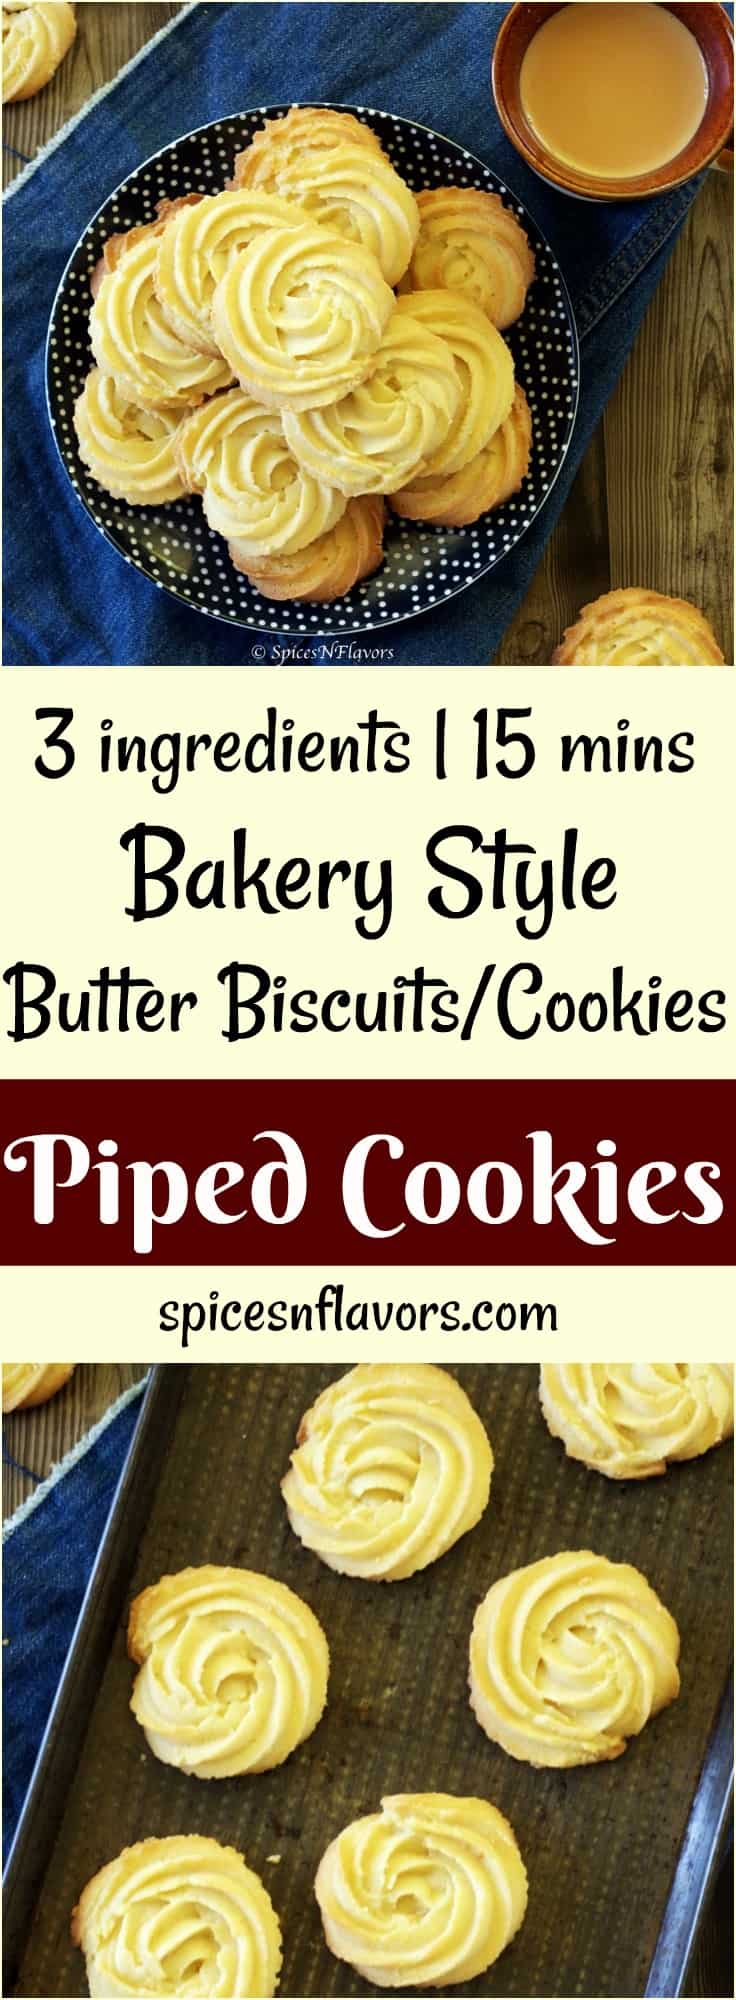 3 ingredient piped cookies piped biscuits butter biscuits butter cookies photography food photography how to make bakery style butter biscuits at home how to make bakery biscuits at home #butterbiscuits #pinterest #bakerybiscuits #3ingredientrecipes #cookies #biscuits #photography